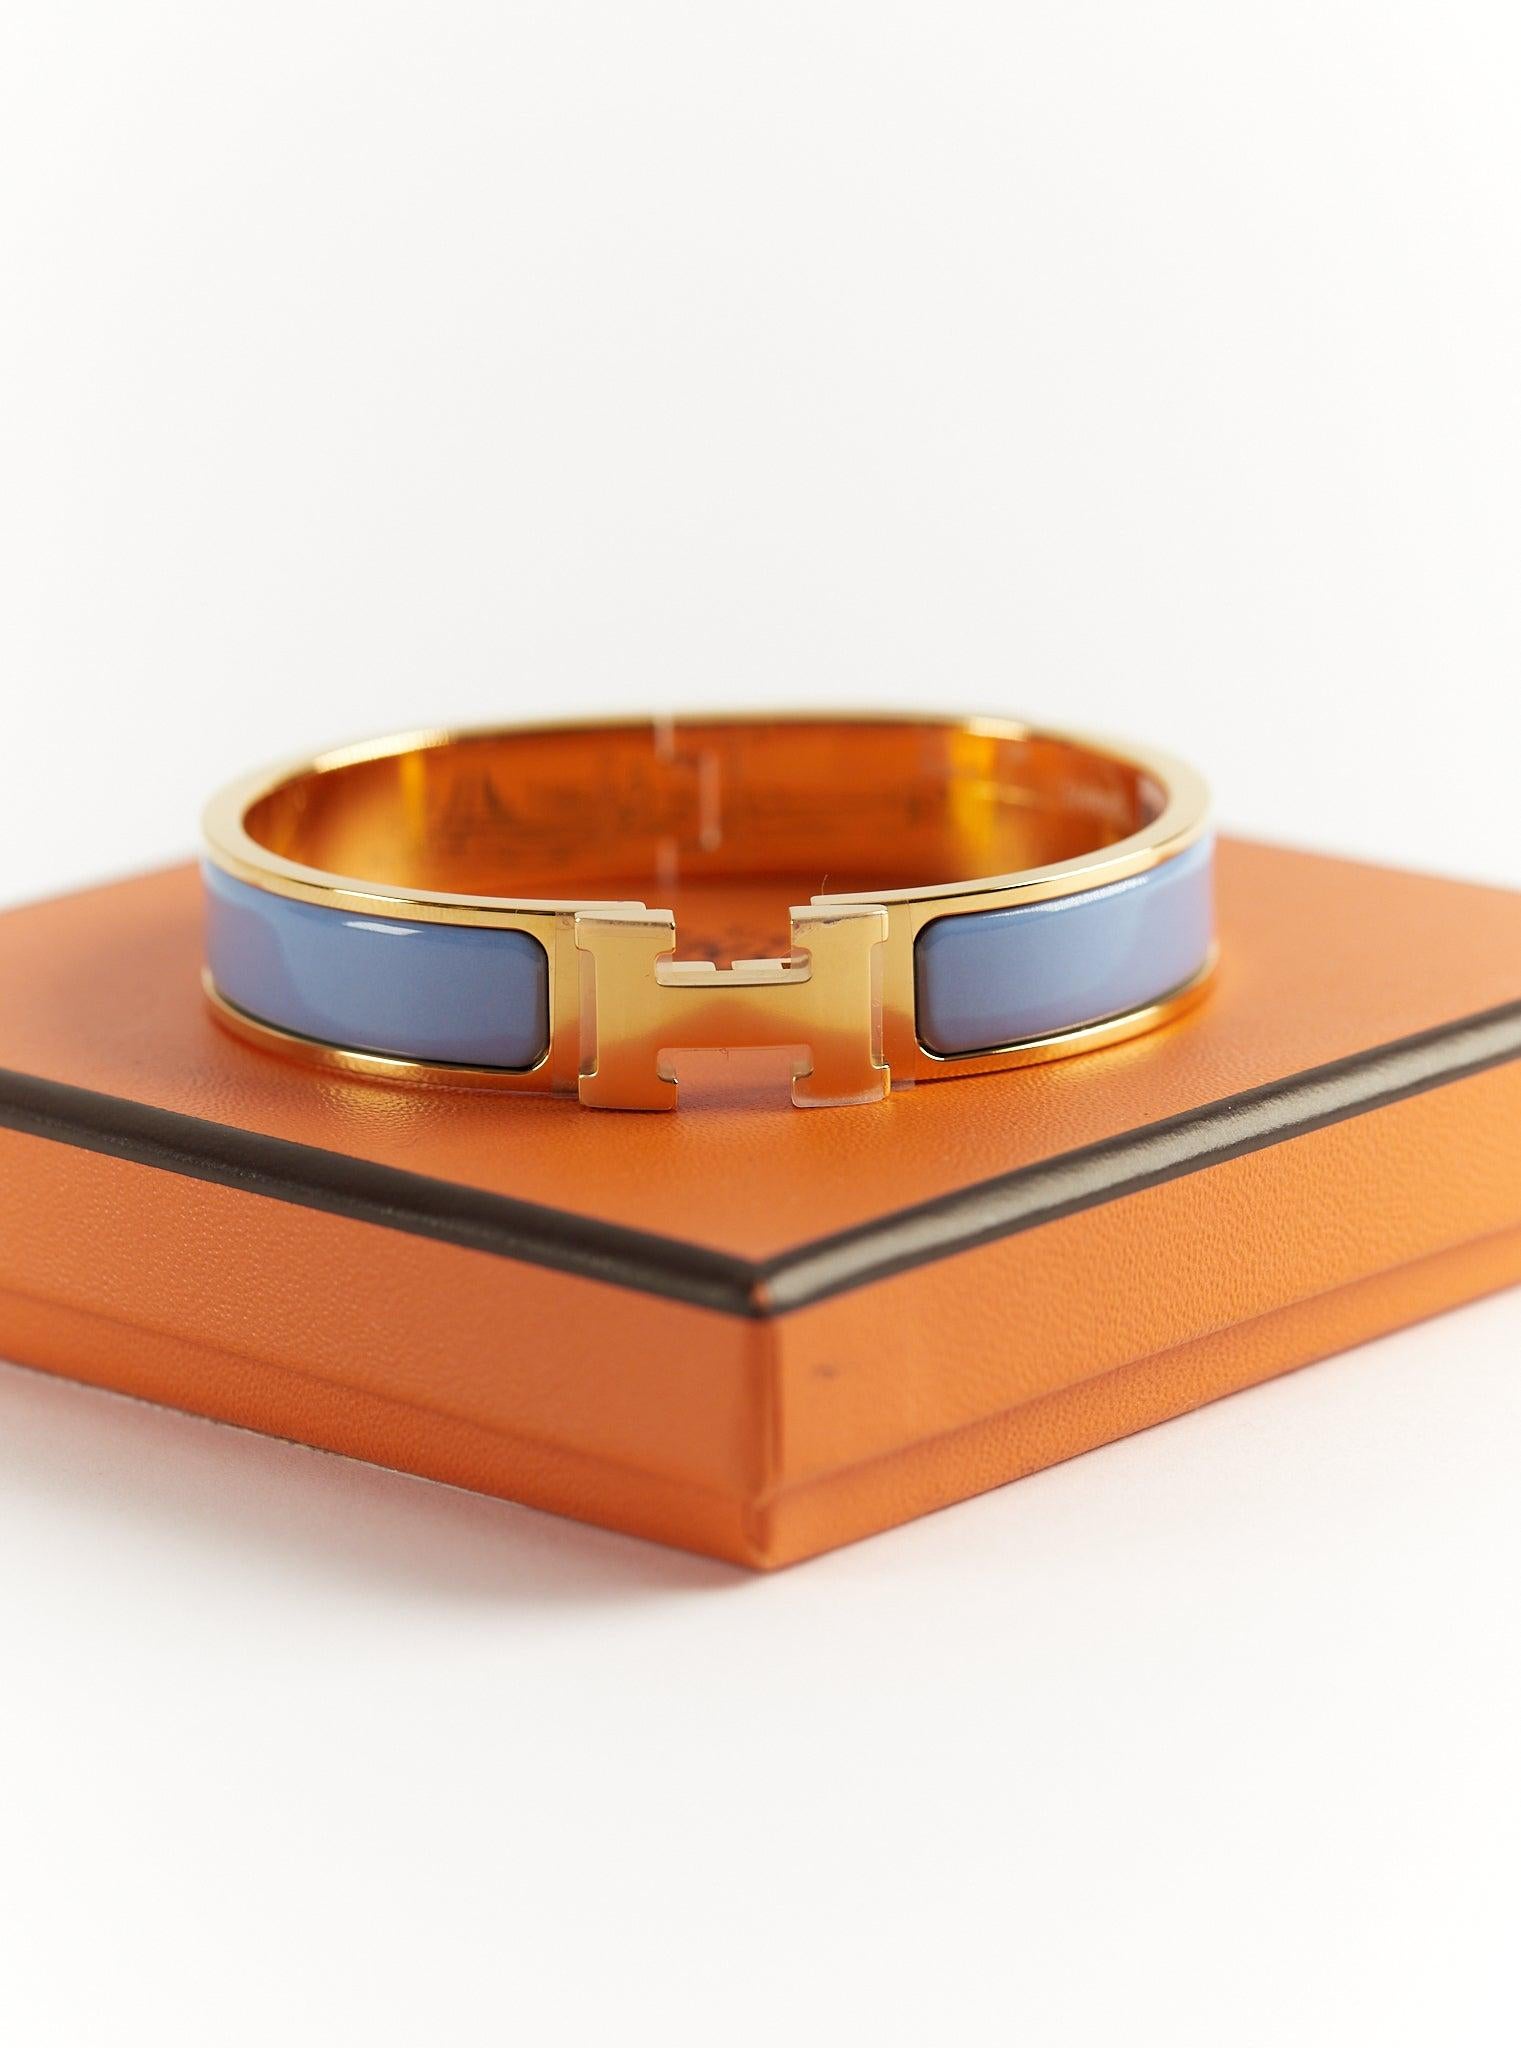 Hermès Clic H GM Bracelet in Chardon and Gold

Wrist size: 16.8 cm  Width: 12 mm

Made in France